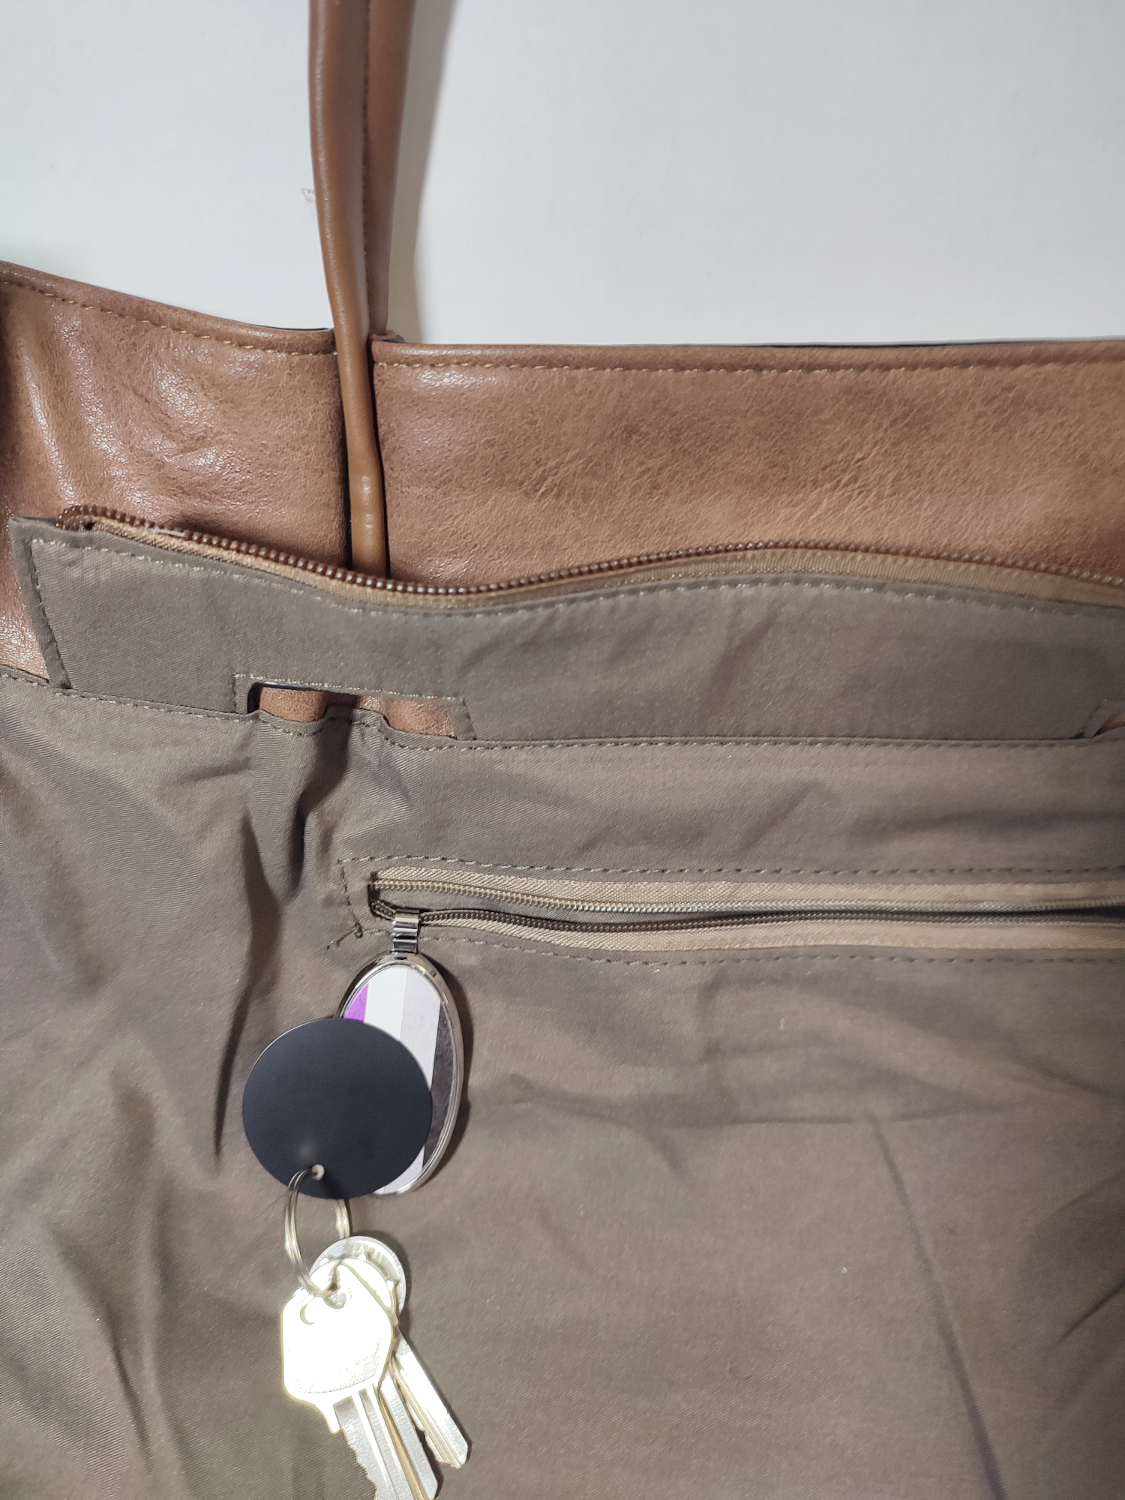 'No Thanks' | Magnetic Phone & Key holder | For your bag, your car, your kitchen and more